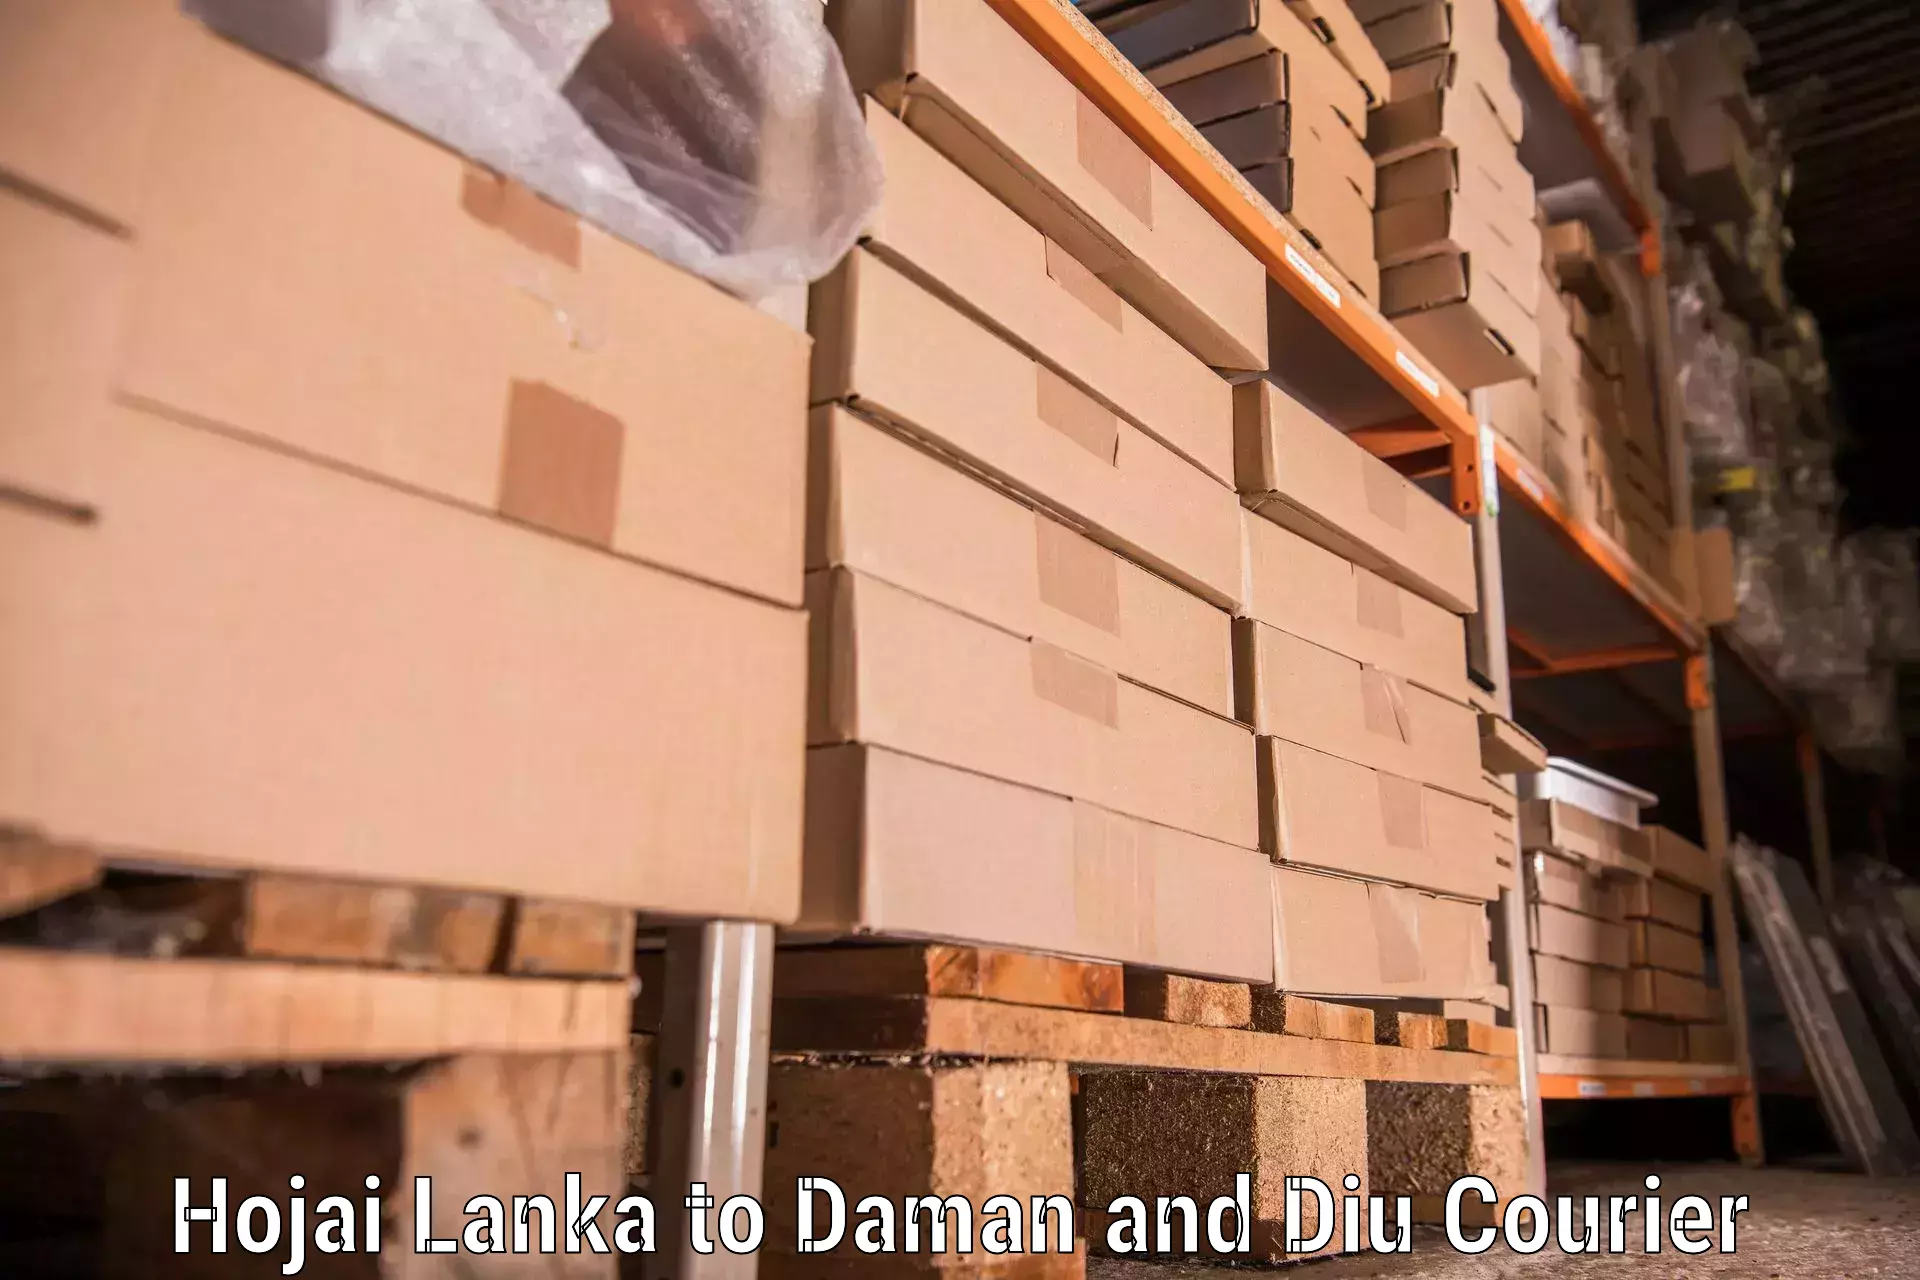 Packing and moving services in Hojai Lanka to Daman and Diu